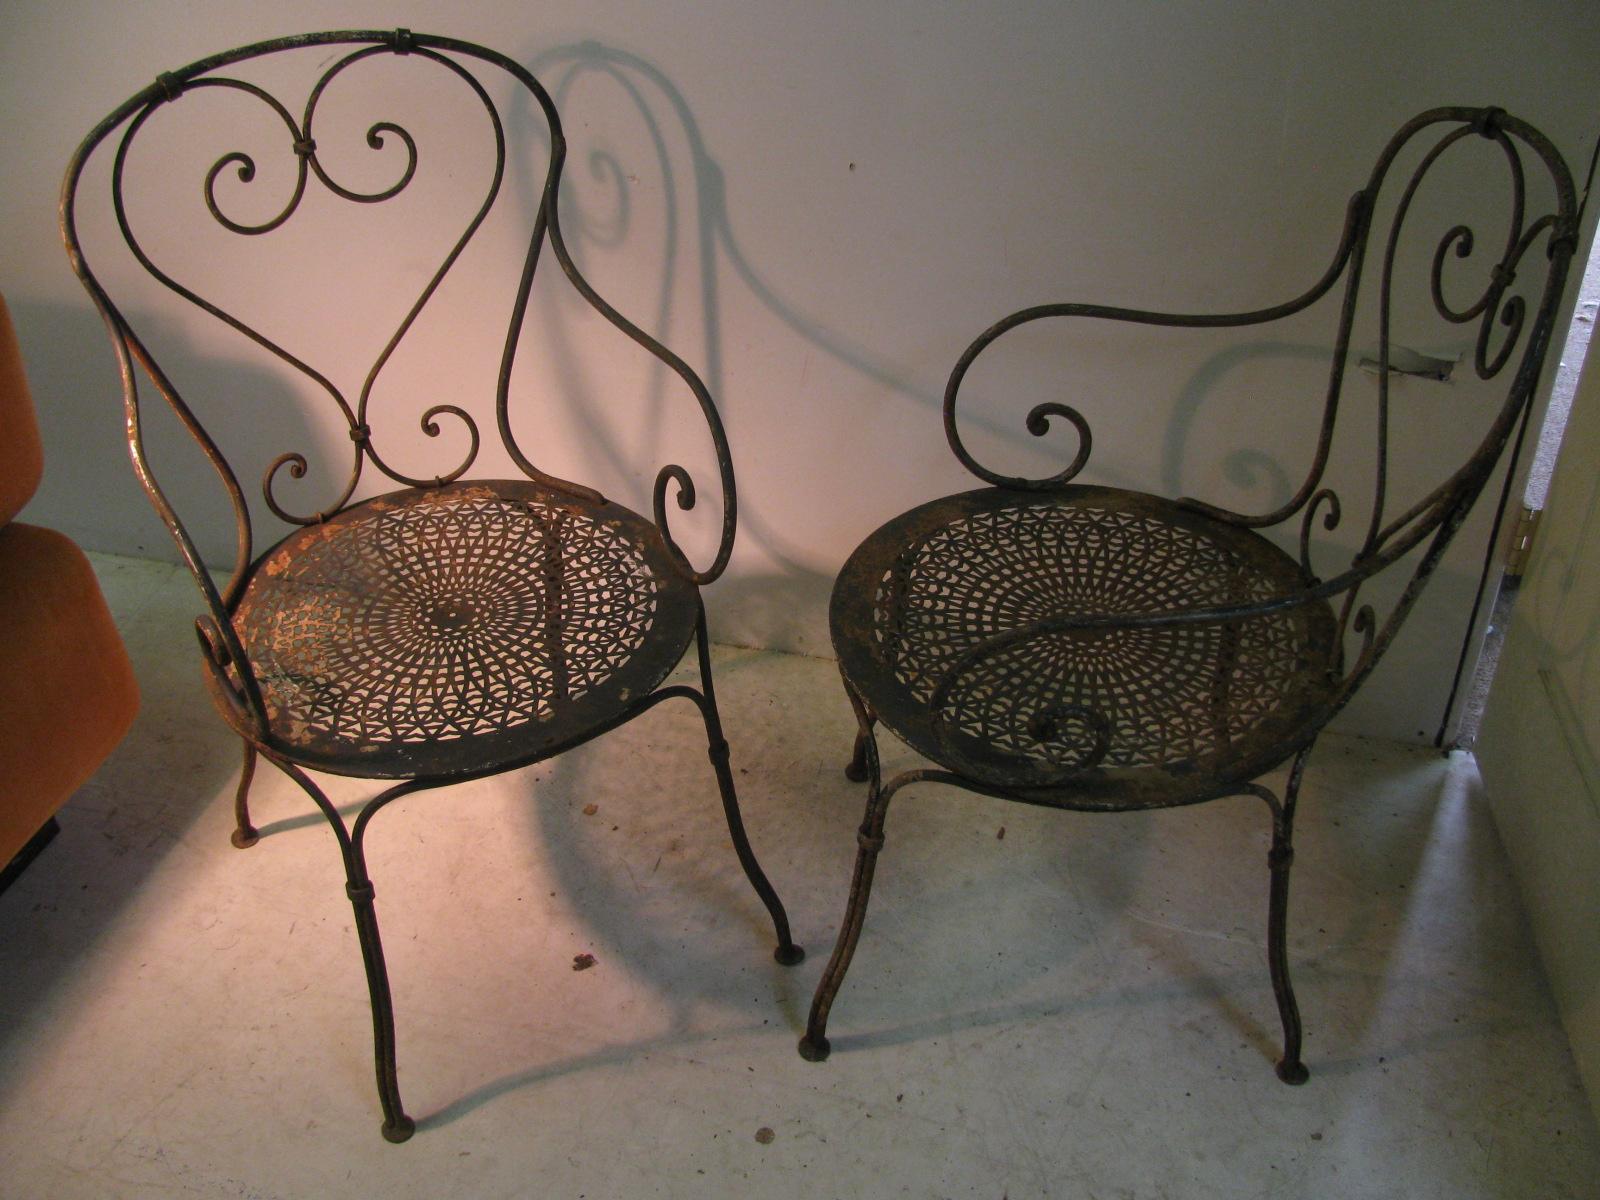 Fabulous pair of French garden chairs. Handmade wrought iron with heart shaped backs and pierced sheet metal seats. Excellent construction methods with iron wraps tying sections together. Seat is riveted.